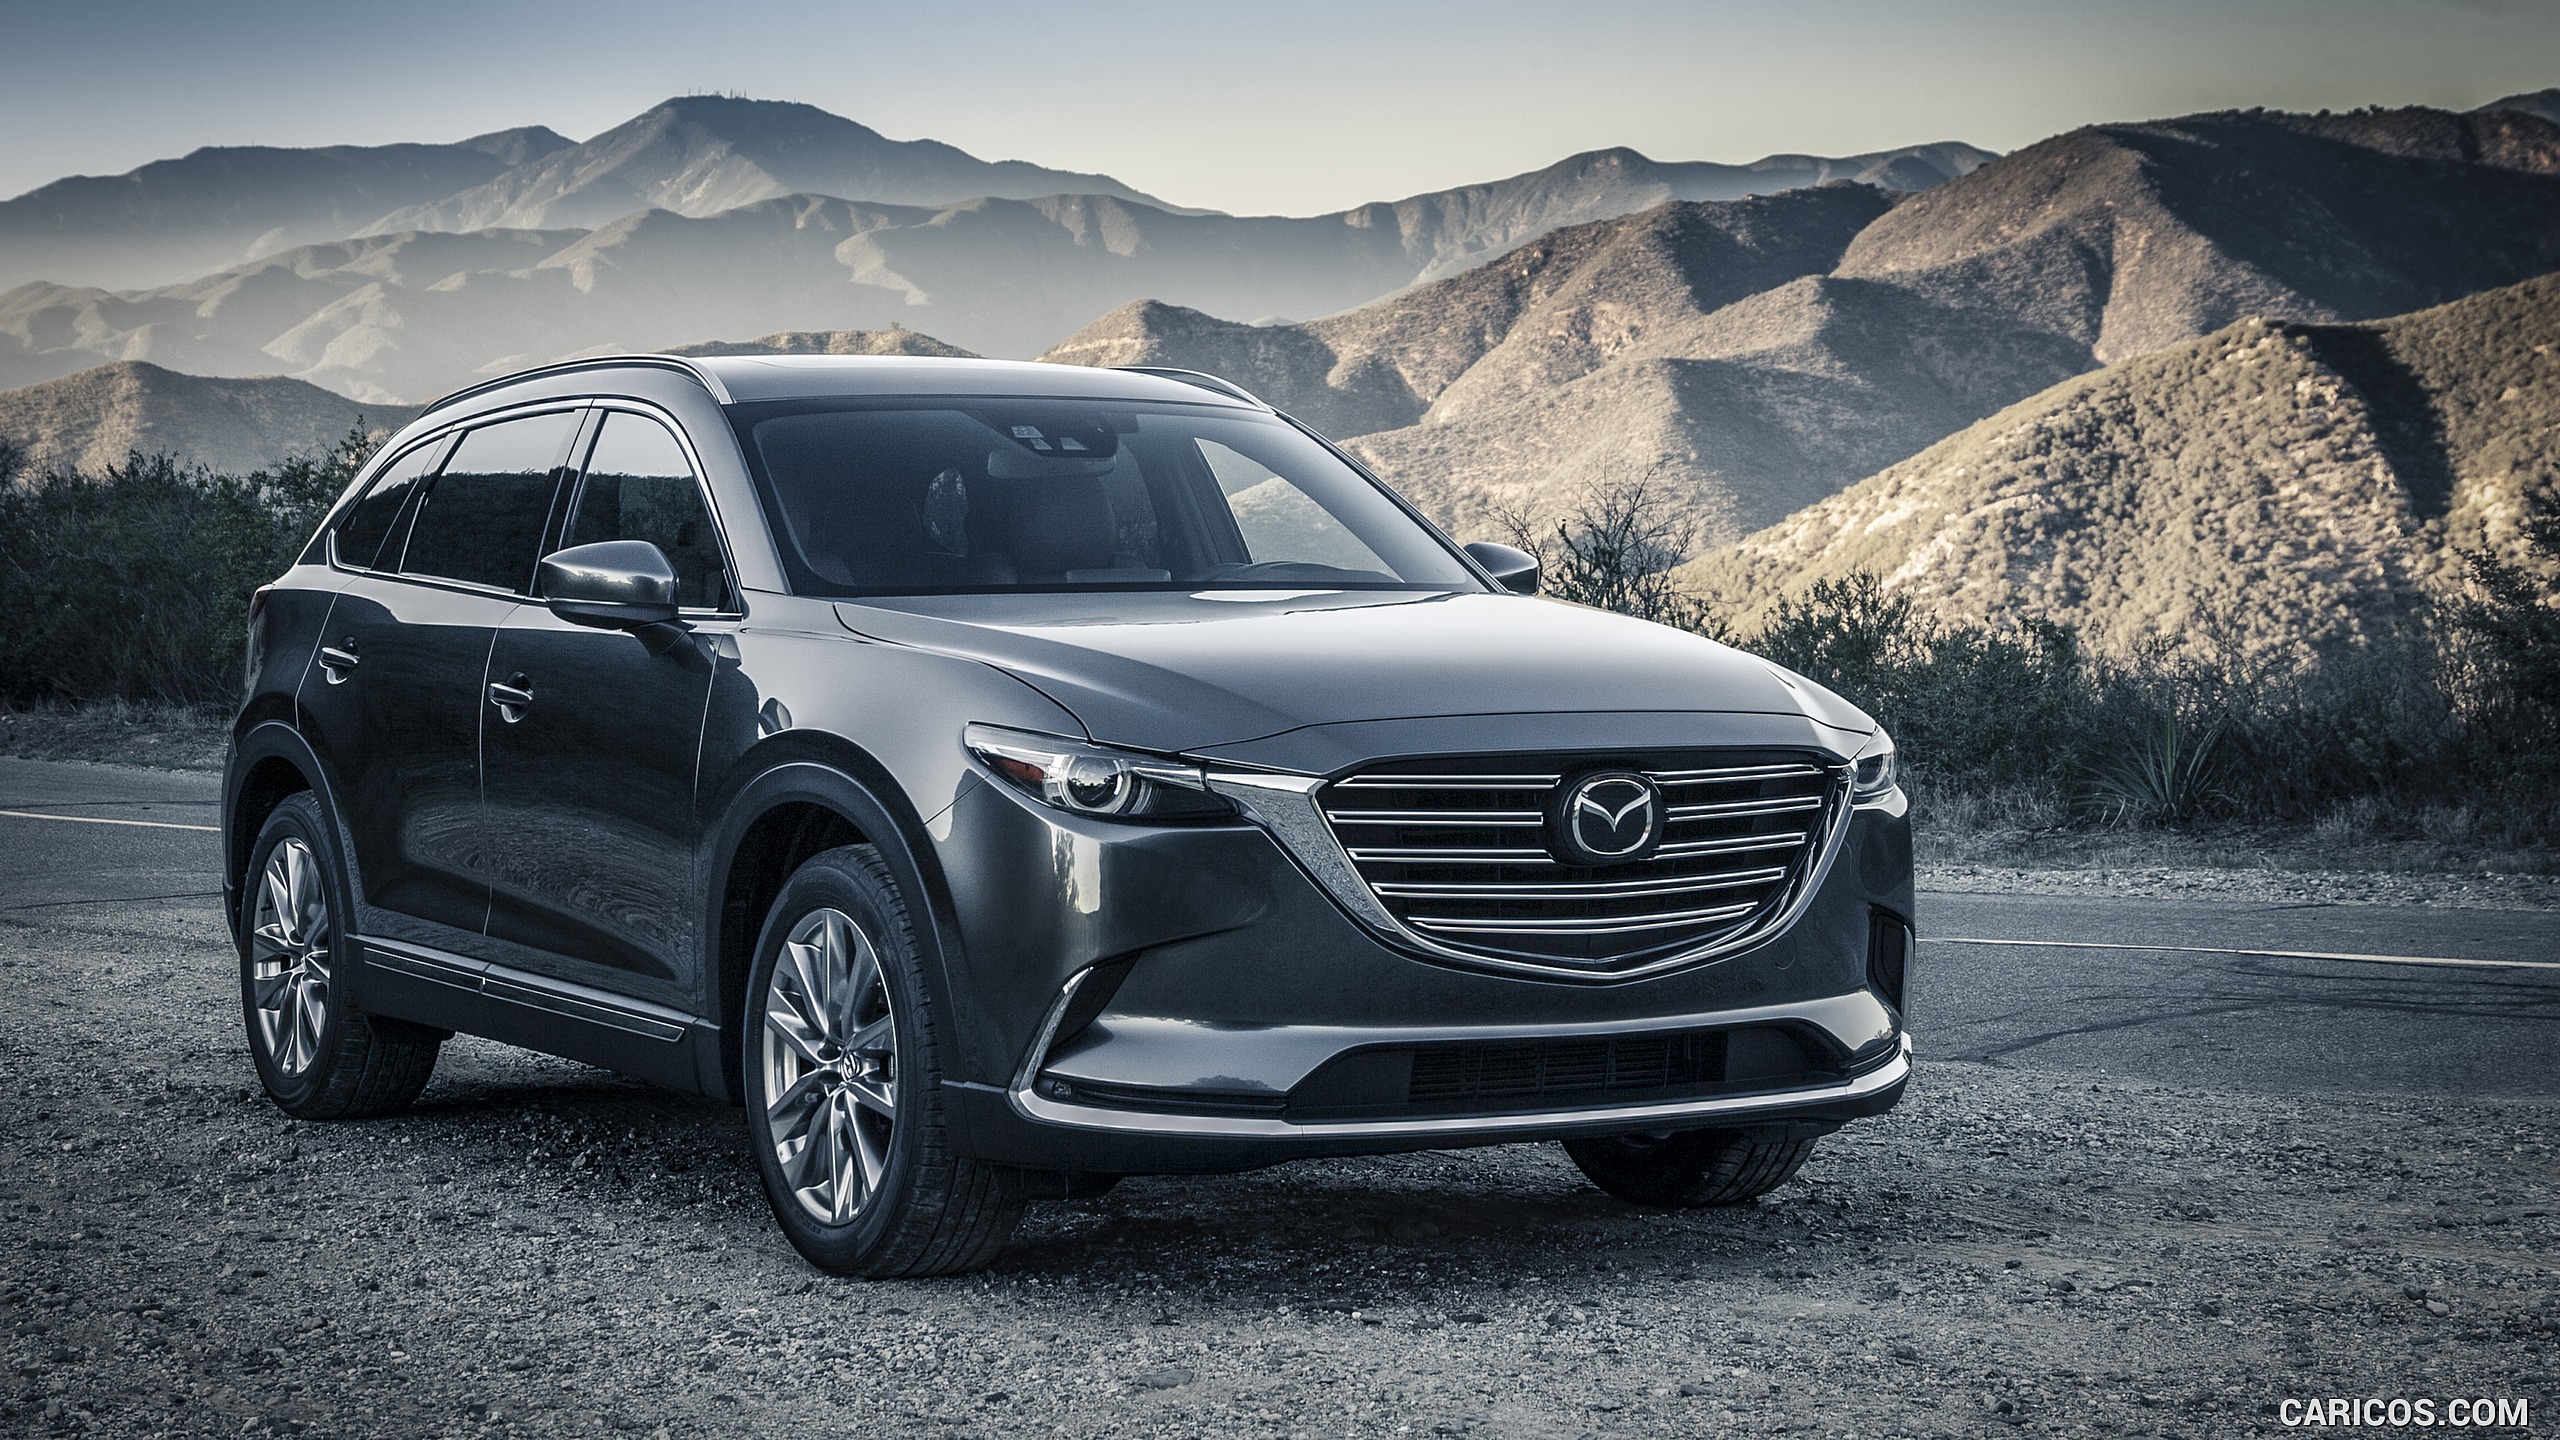 2016 Mazda CX-9 - Front, #1 of 69